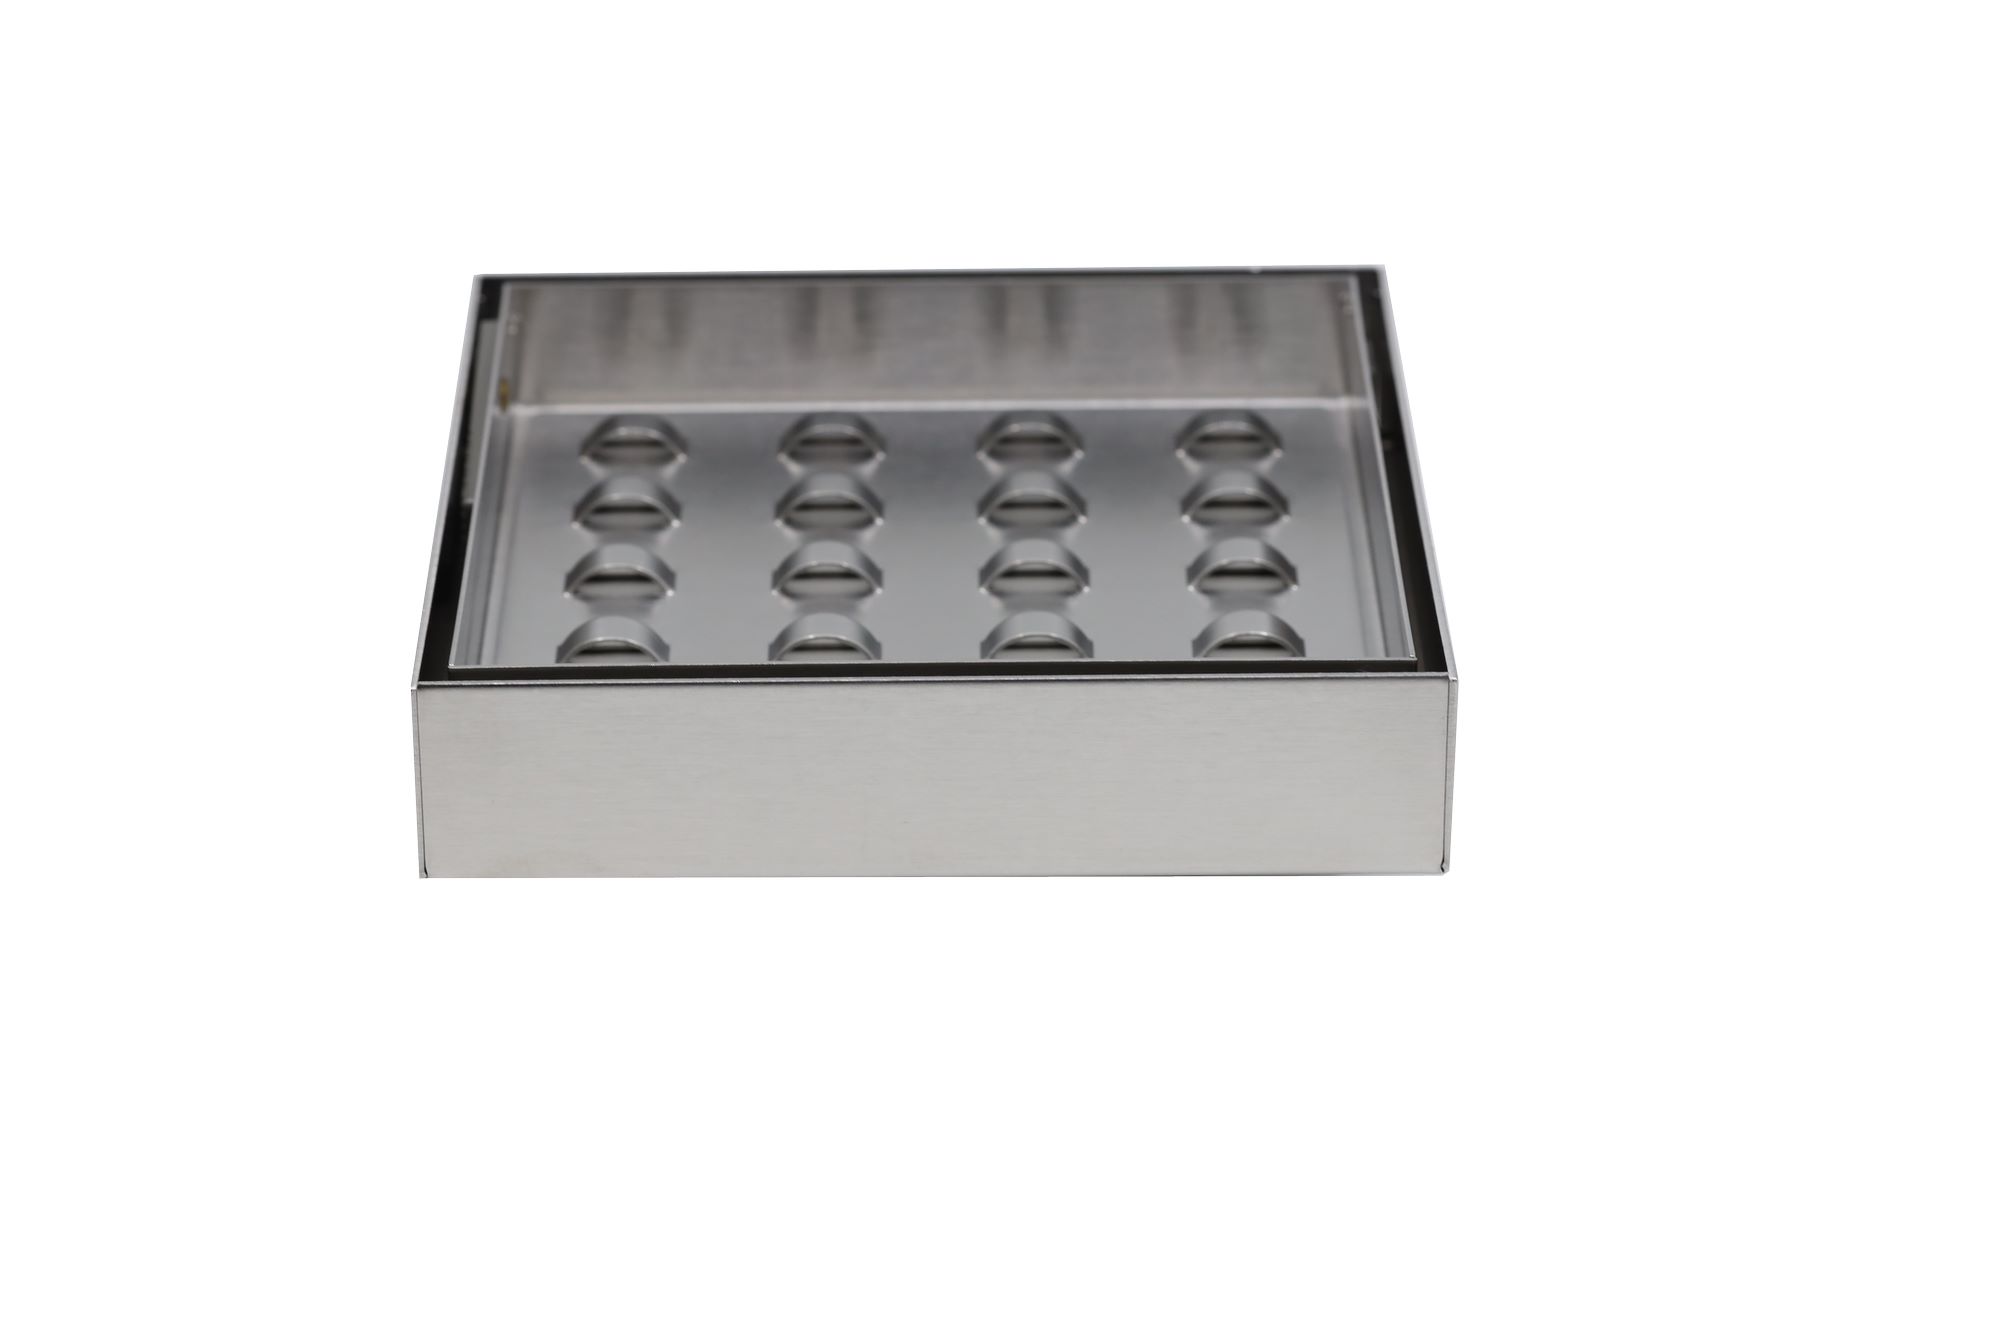 Buy Floor Drain - Stainless Steel - Recessed 6"X 6" Online | Construction Finishes | Qetaat.com